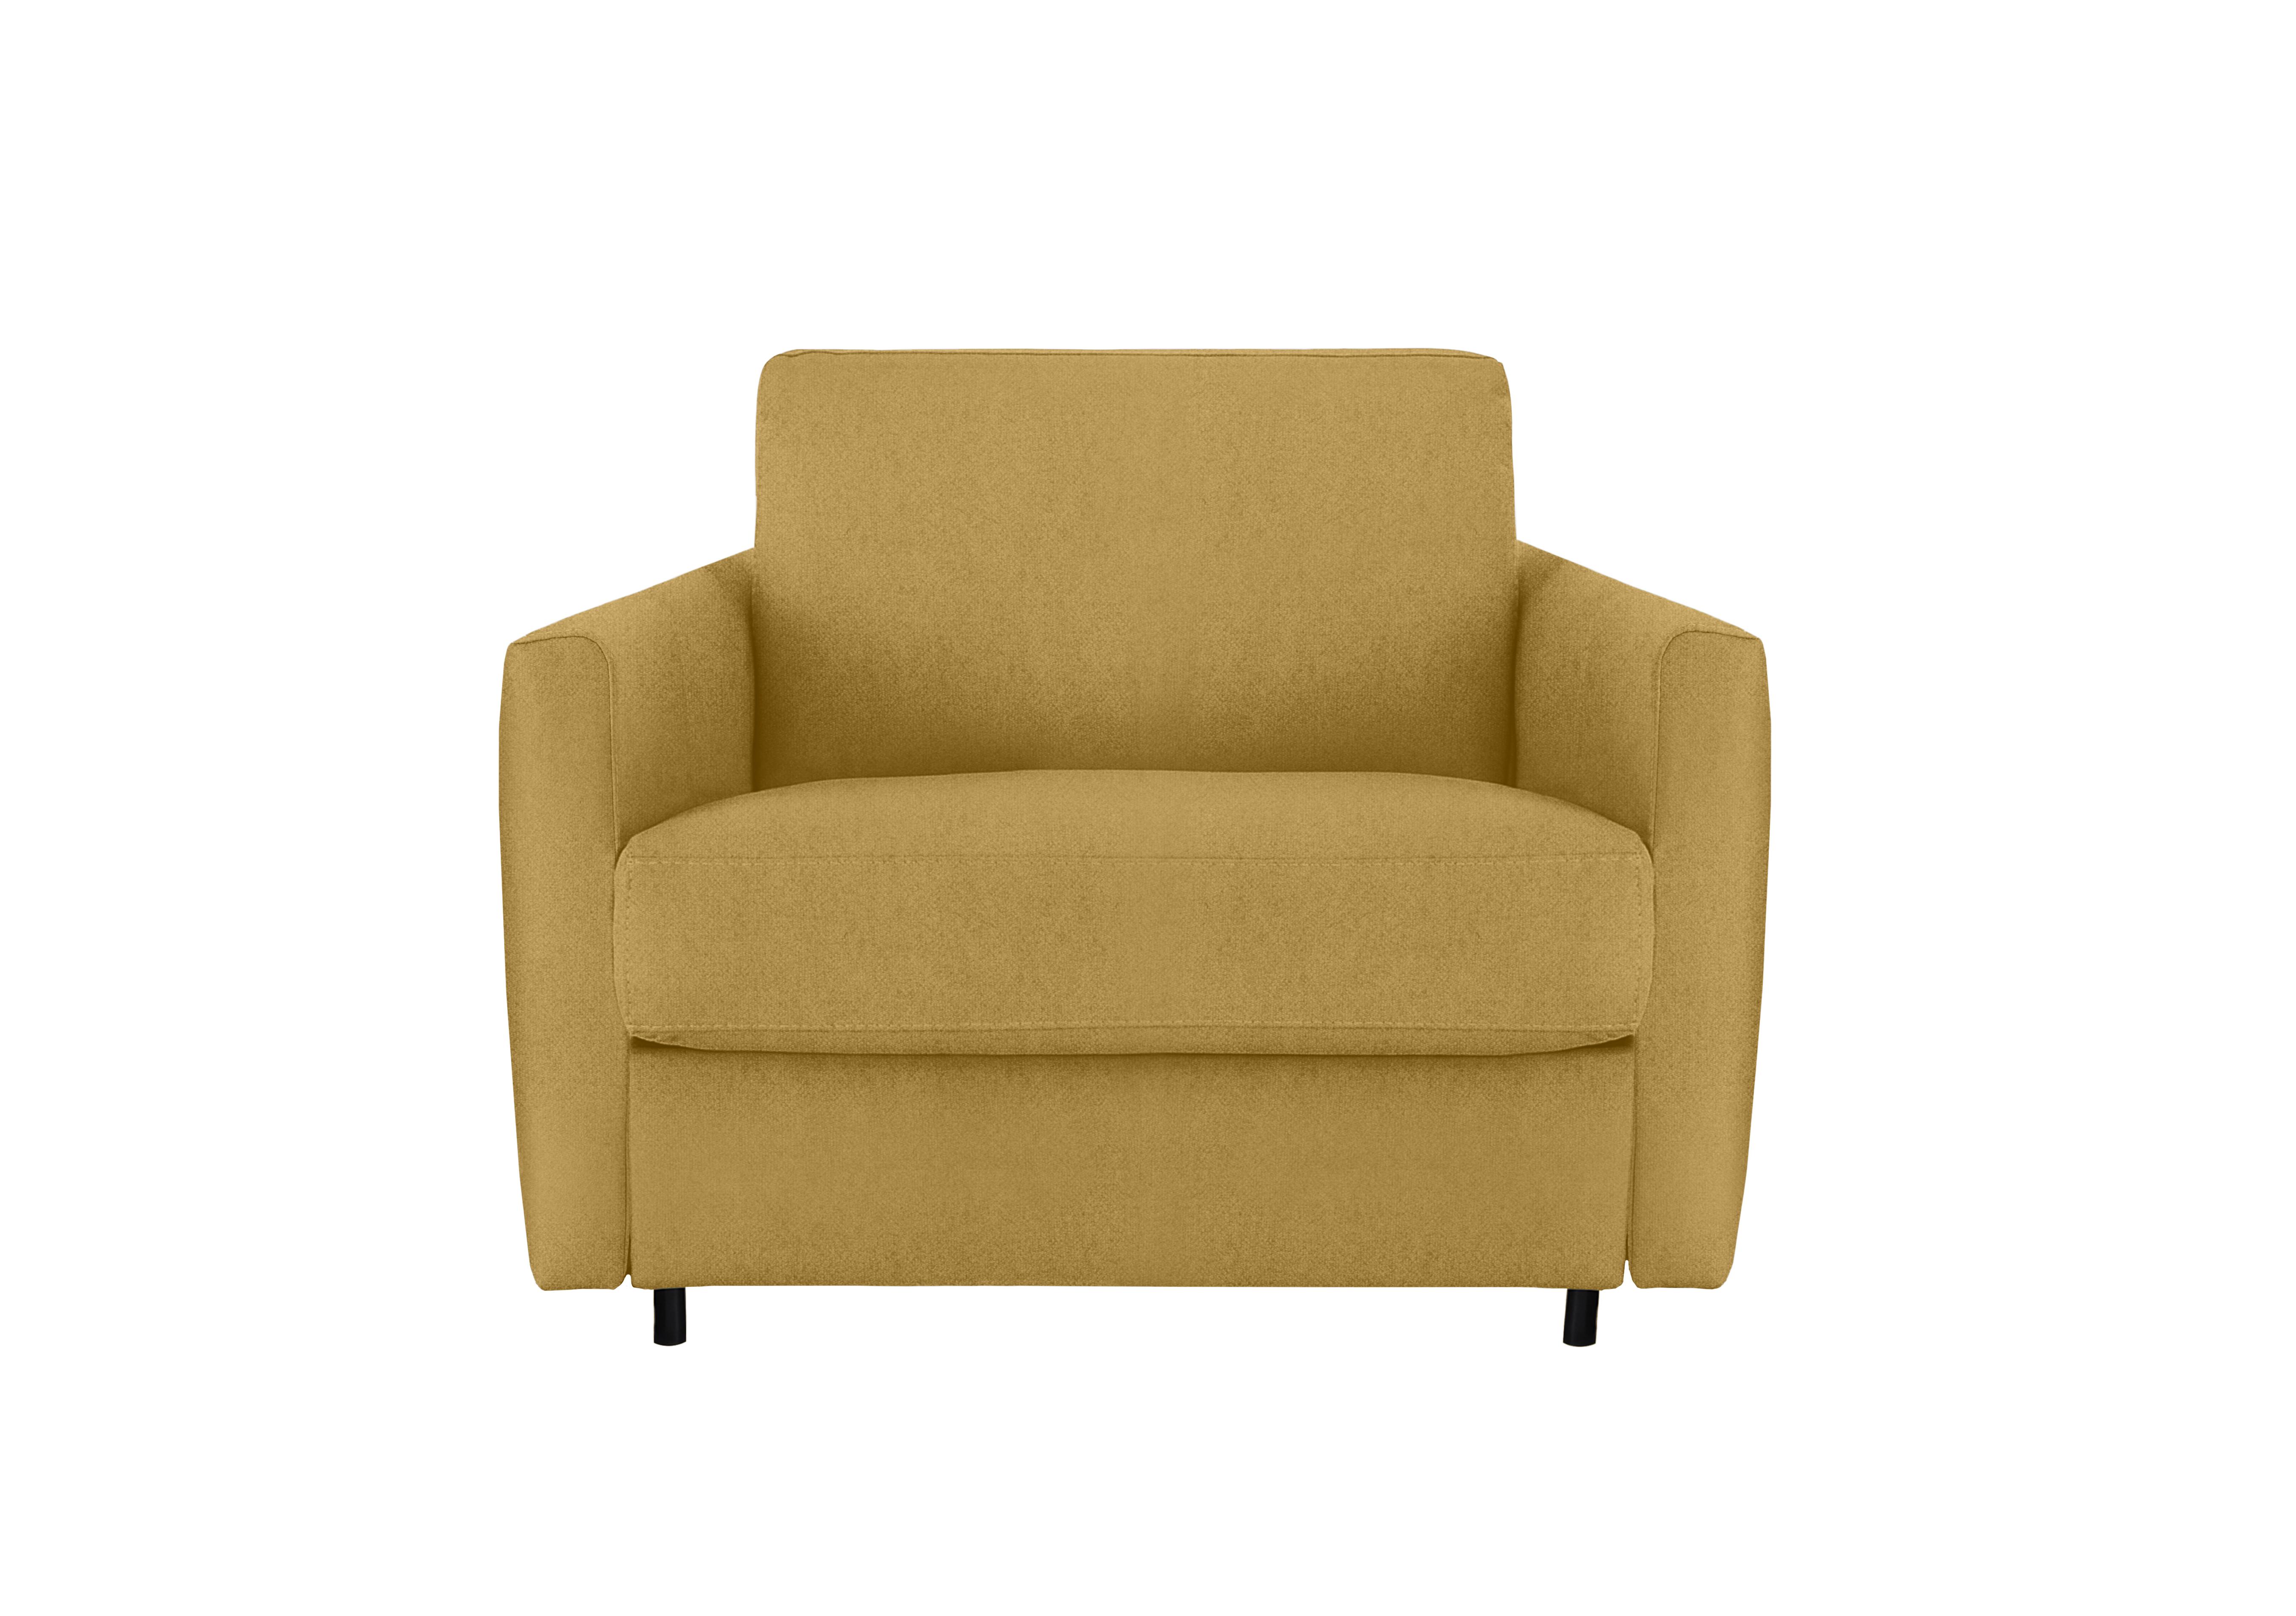 Alcova Fabric Chair Sofa Bed with Slim Arms in Fuente Mostaza on Furniture Village